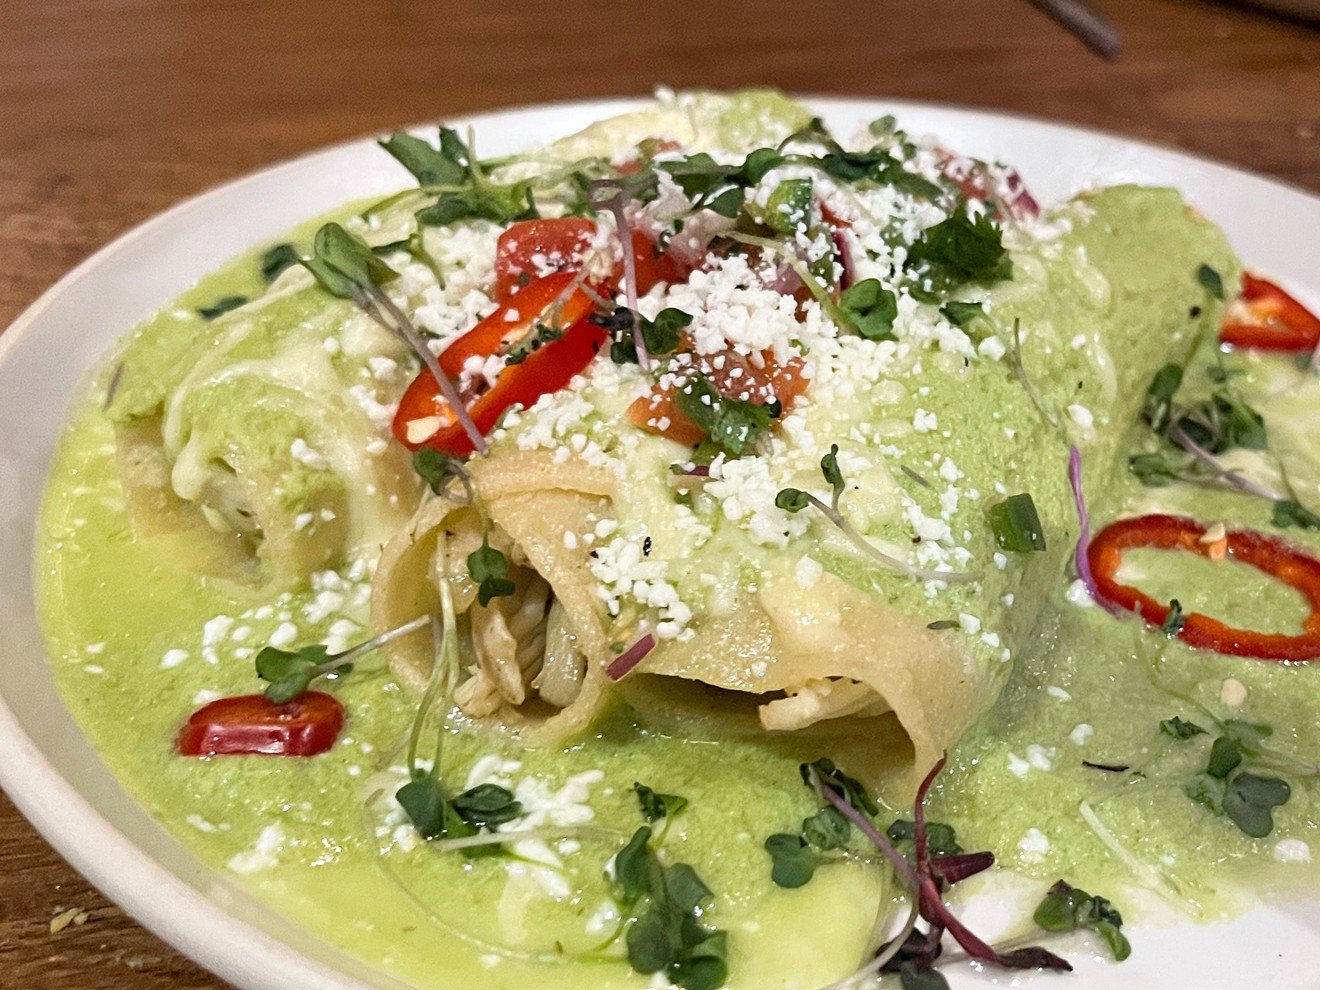 Enchiladas, filled with chicken, a drenched with a fresh and bright salsa verde.